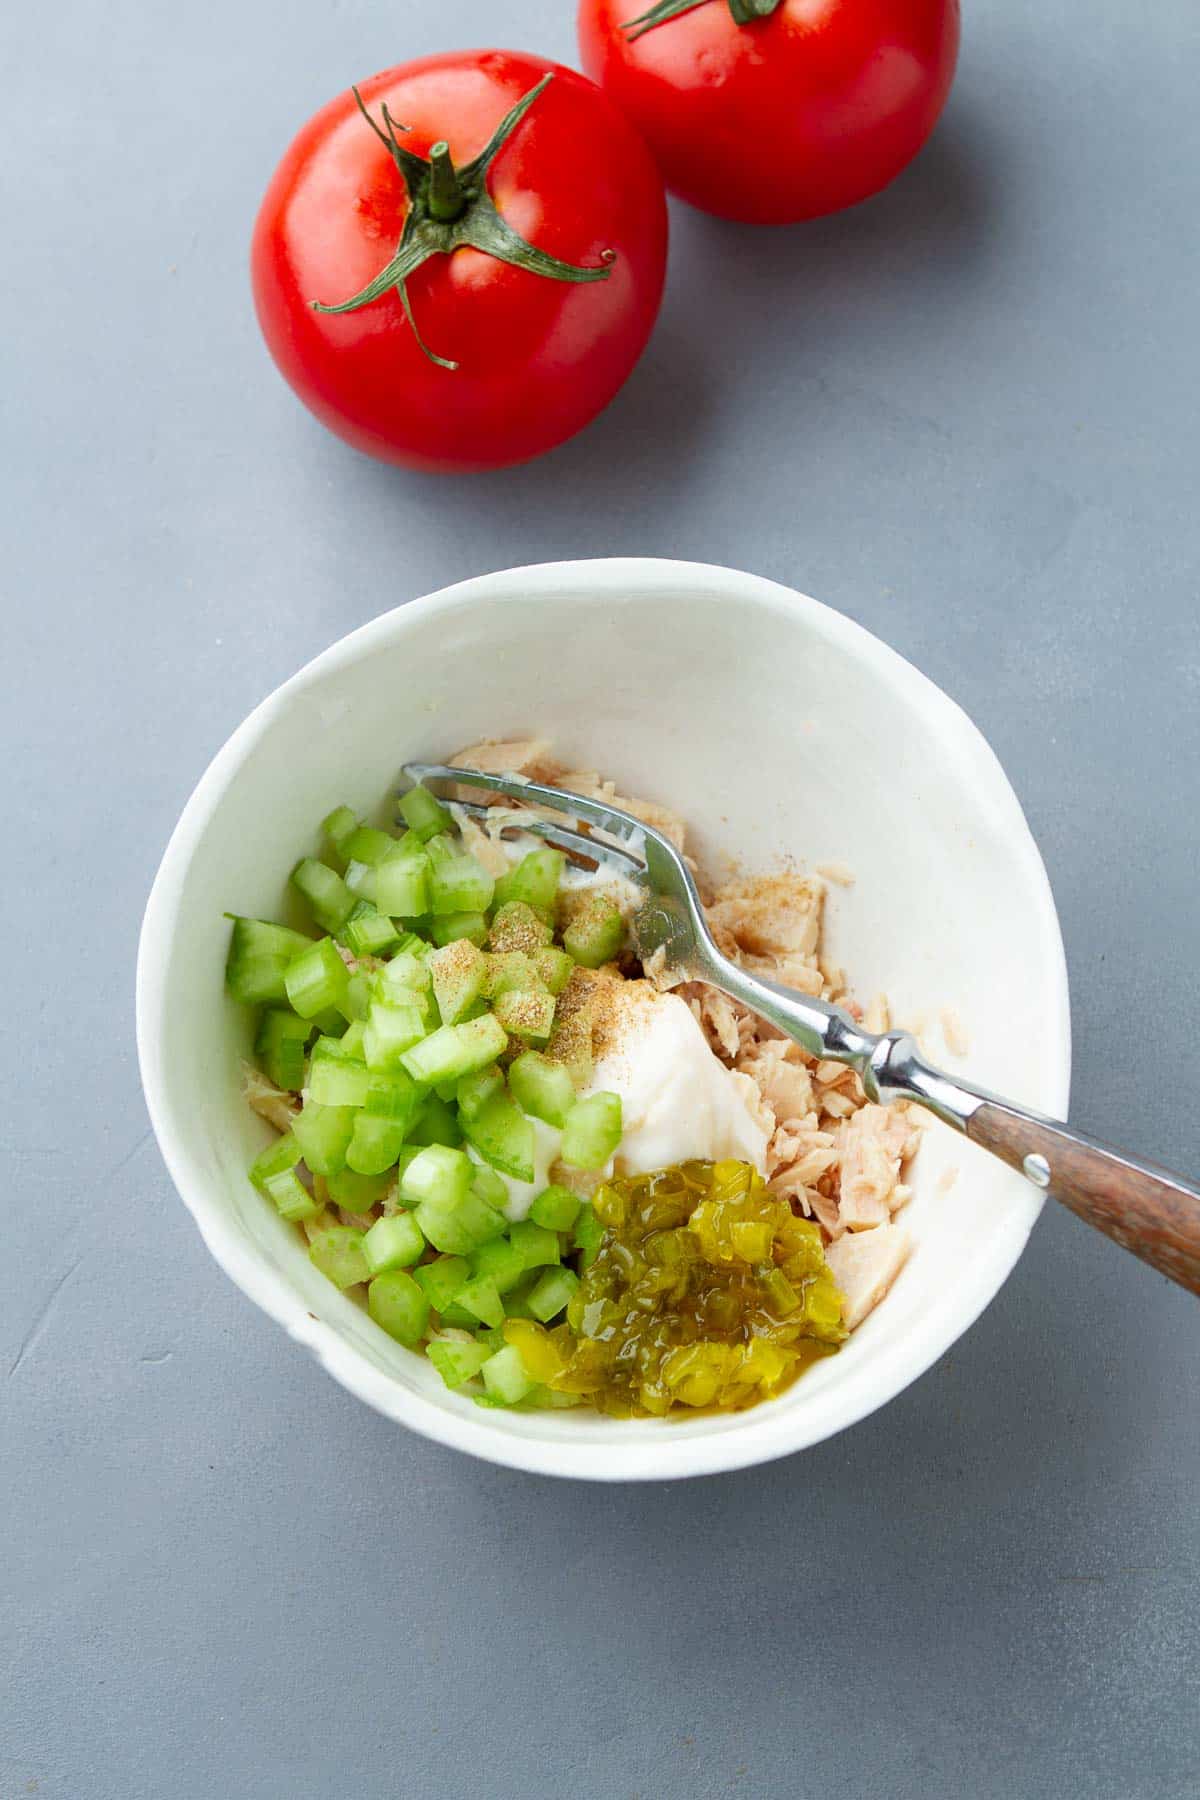 Tuna, mayonnaise, celery and relish in a white bowl.